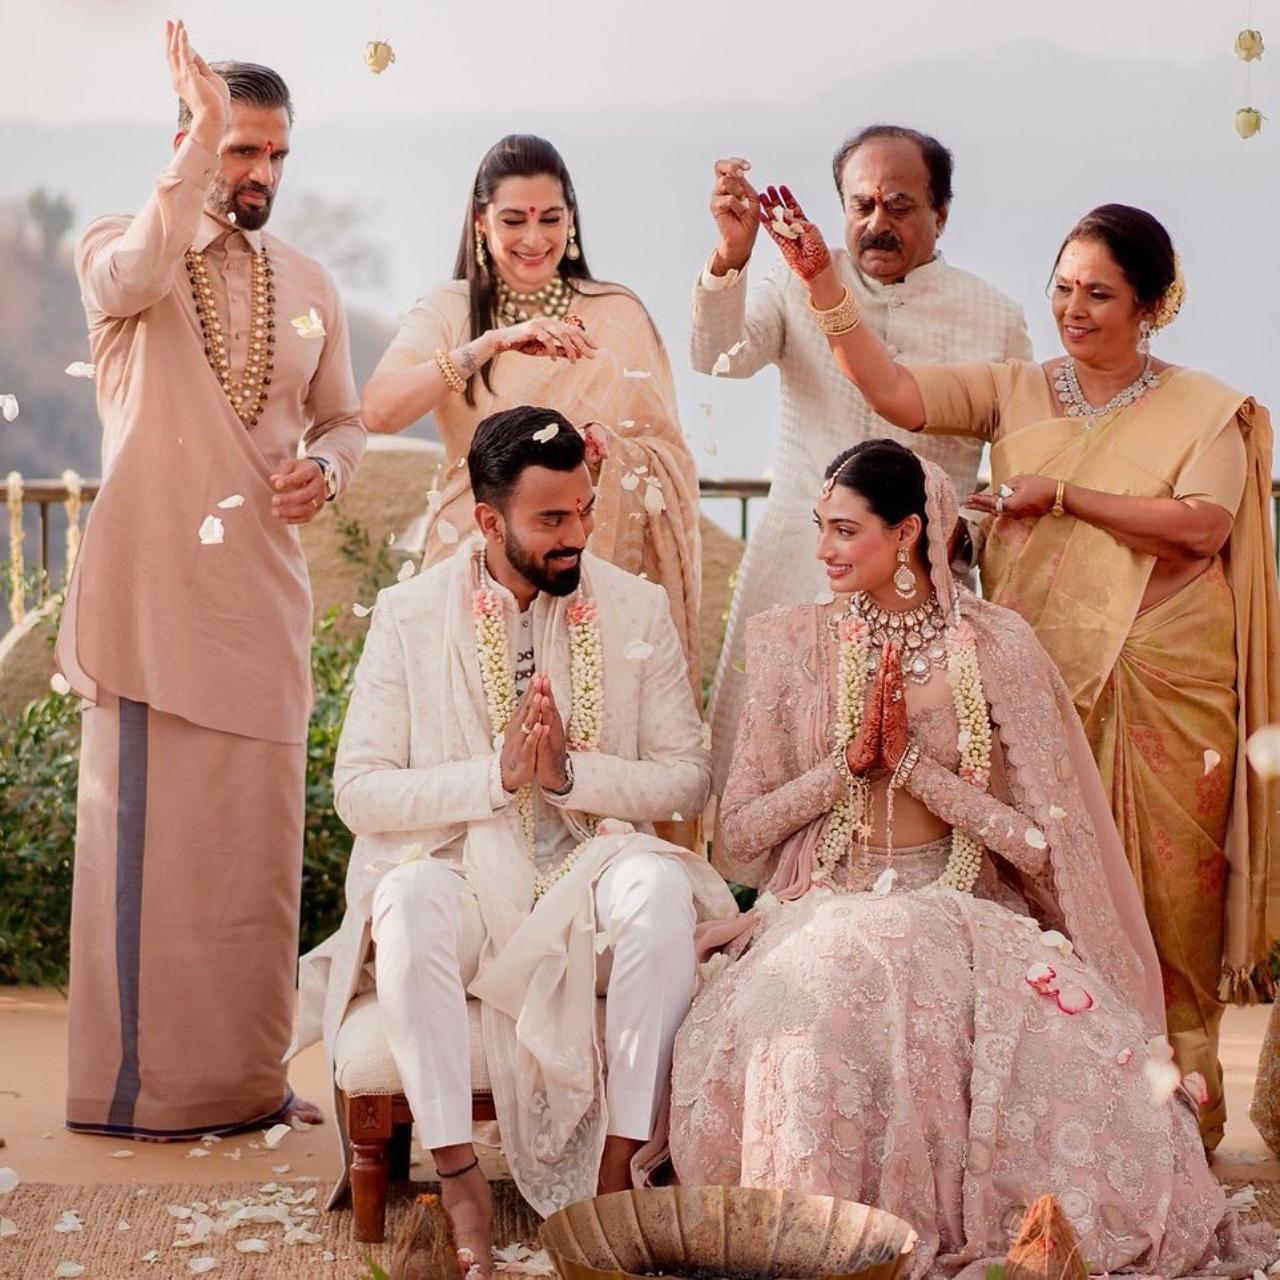 For the wedding, Athiya looked resplendent in an old-rose pink lehenga and her groom cricketer KL Rahul complemented her look in an ivory sherwani, as the star couple tied the knot at Suniel Shetty's bungalow in Khandala